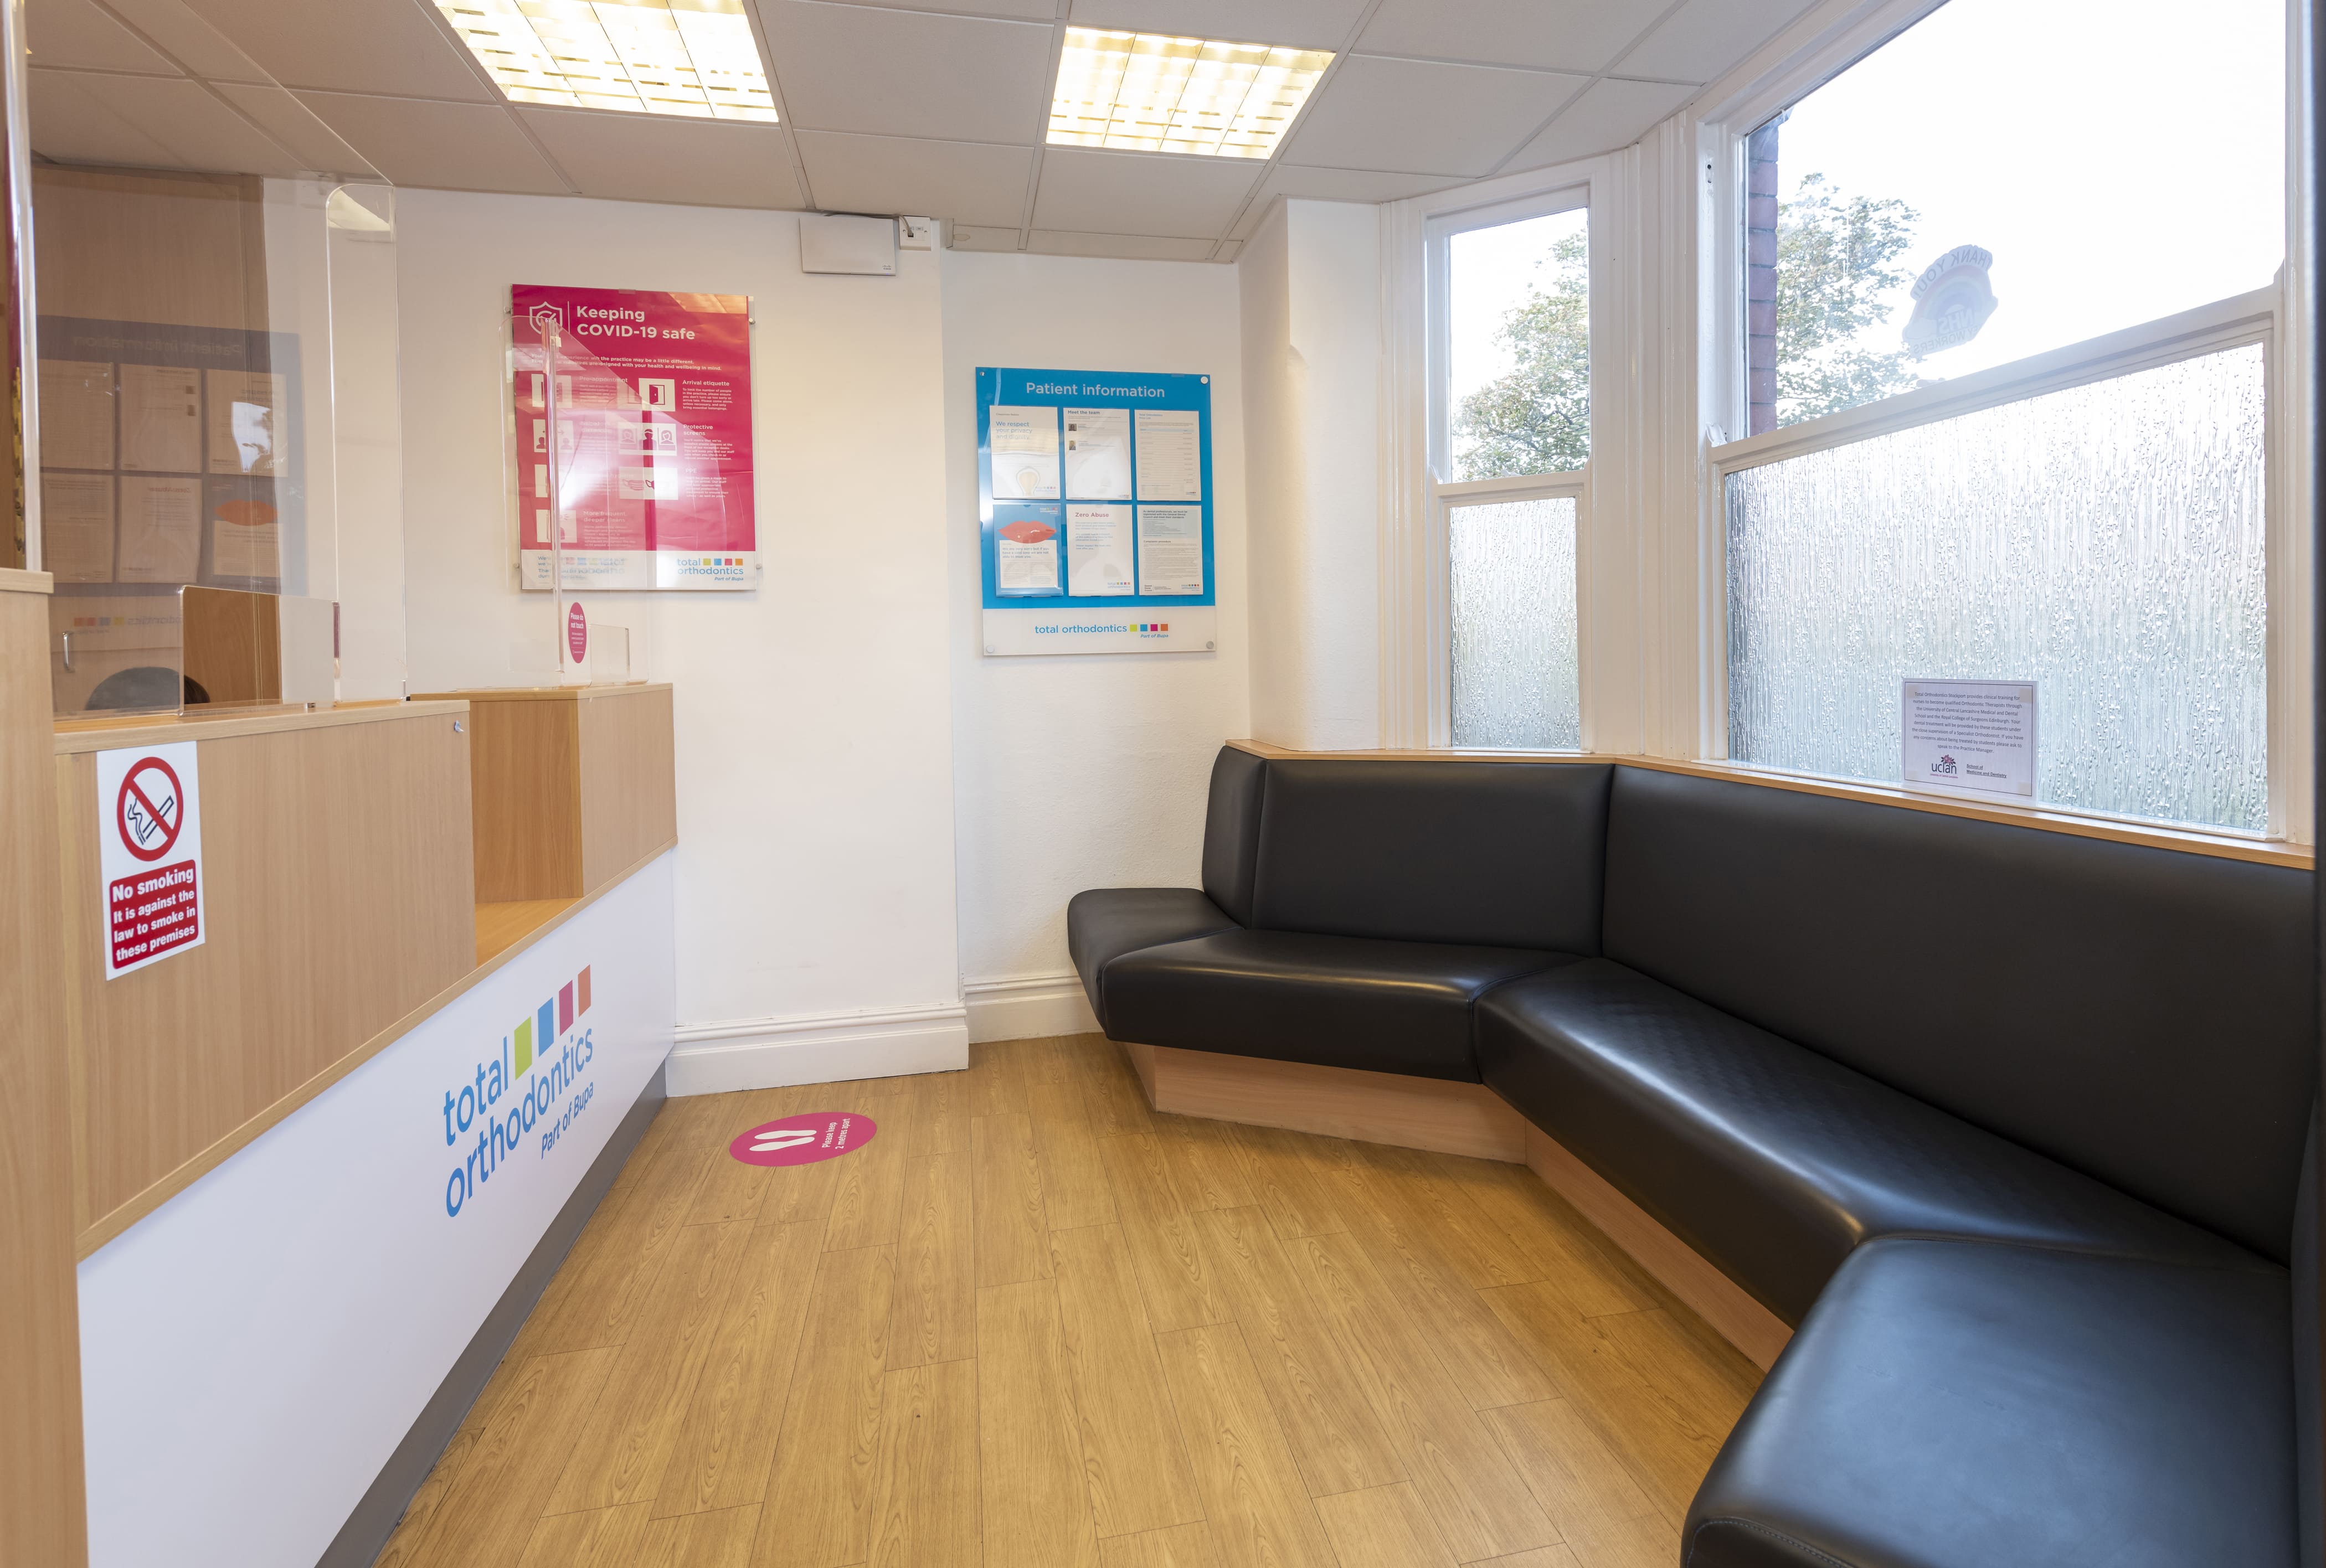 Images Total Orthodontics Stockport